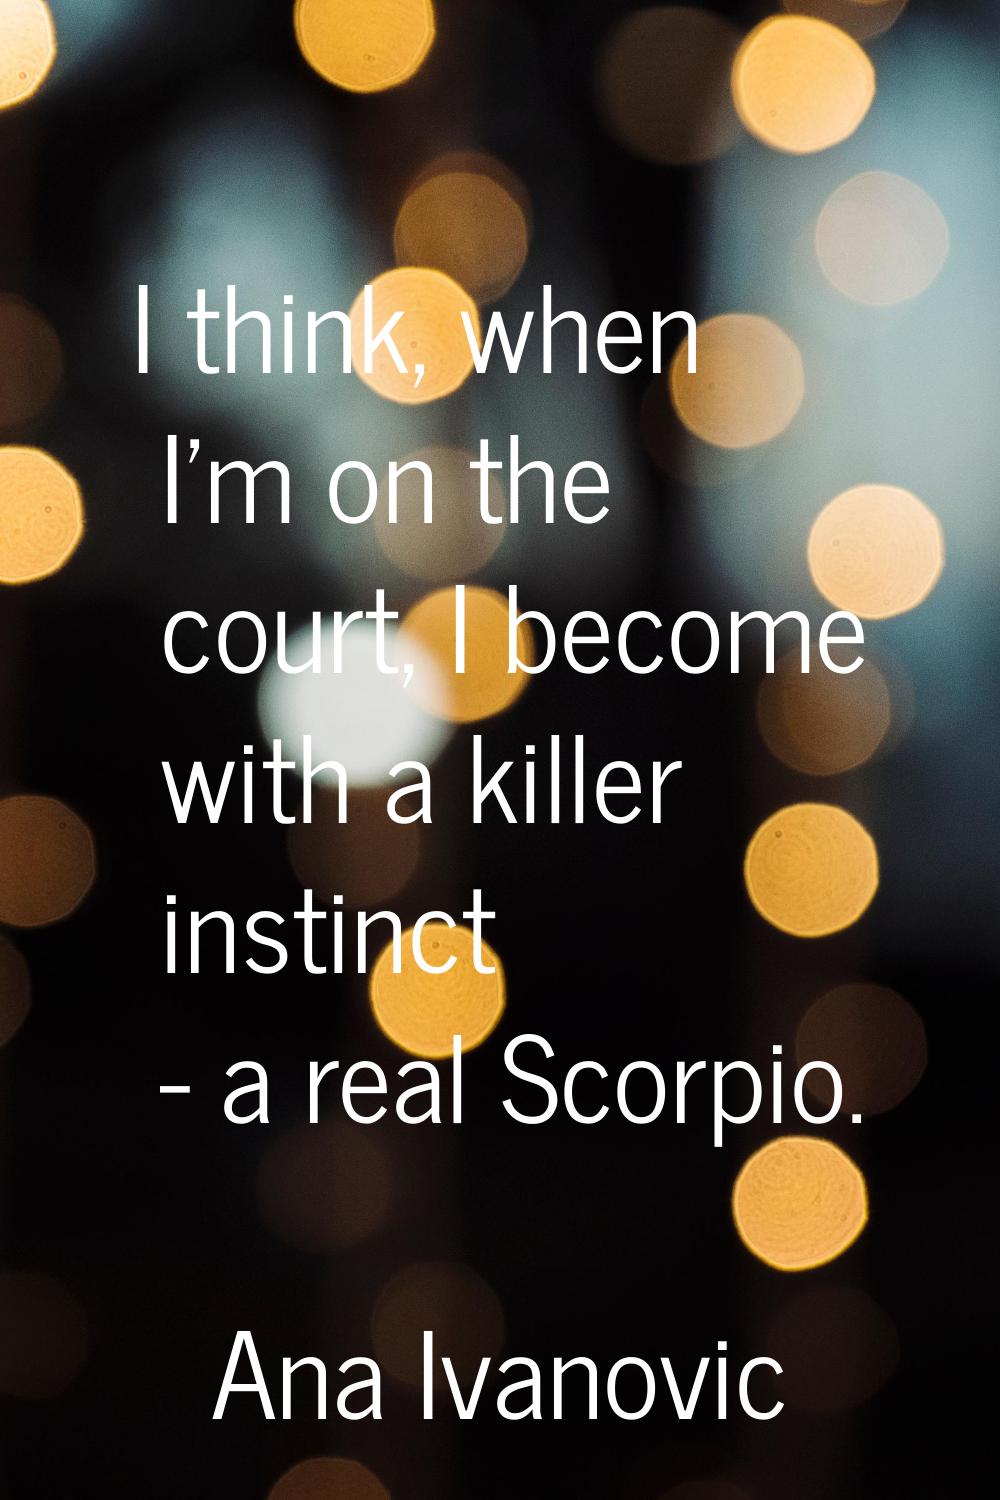 I think, when I'm on the court, I become with a killer instinct - a real Scorpio.